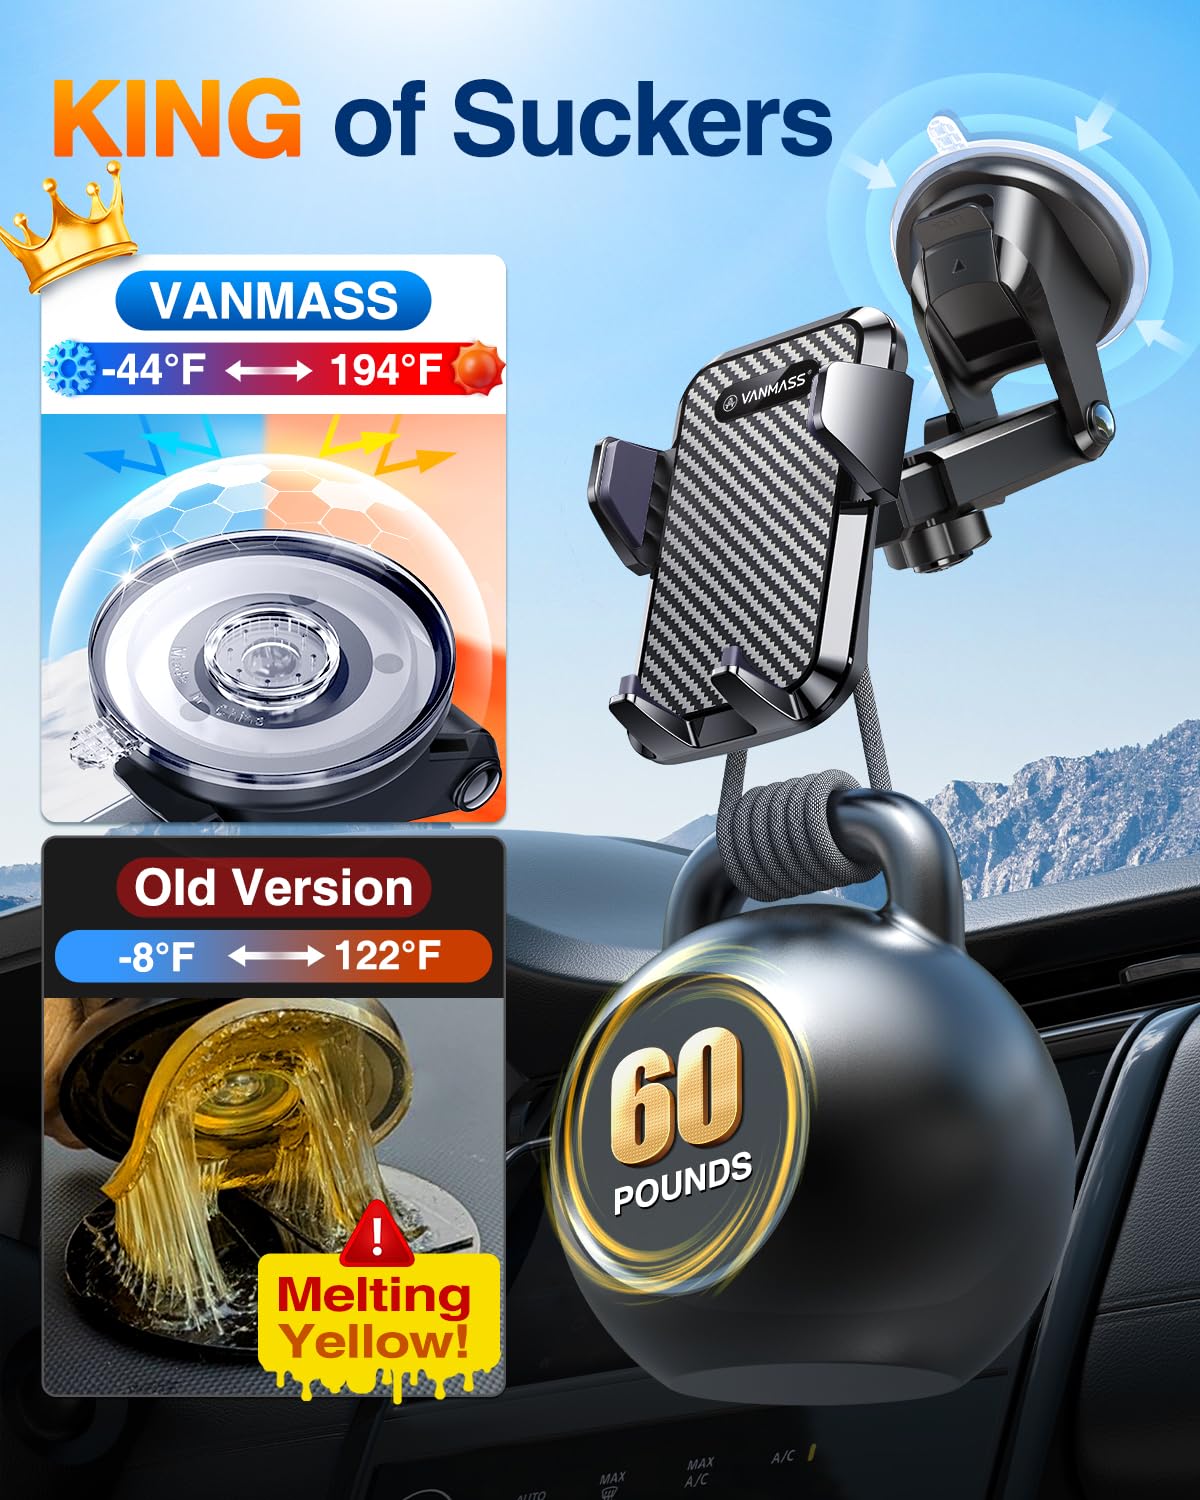 VANMASS Universal Car Phone Mount,【Patent & Safety Certs】 Upgraded Handsfree Stand, Phone Holder for Car Dashboard Windshield Vent, Compatible iPhone 14 13 12 Samsung Android & Pickup Truck